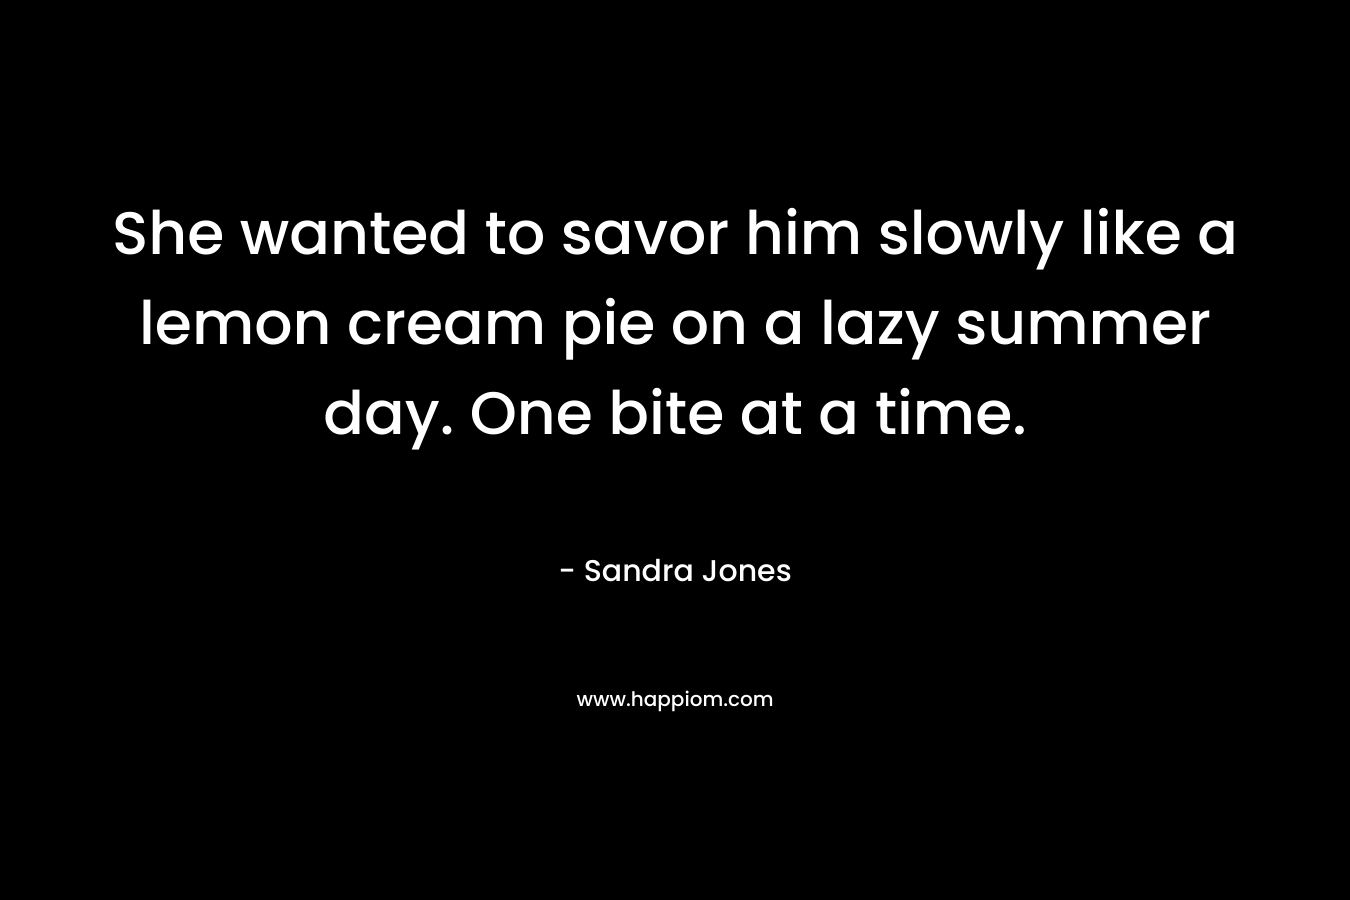 She wanted to savor him slowly like a lemon cream pie on a lazy summer day. One bite at a time. – Sandra Jones